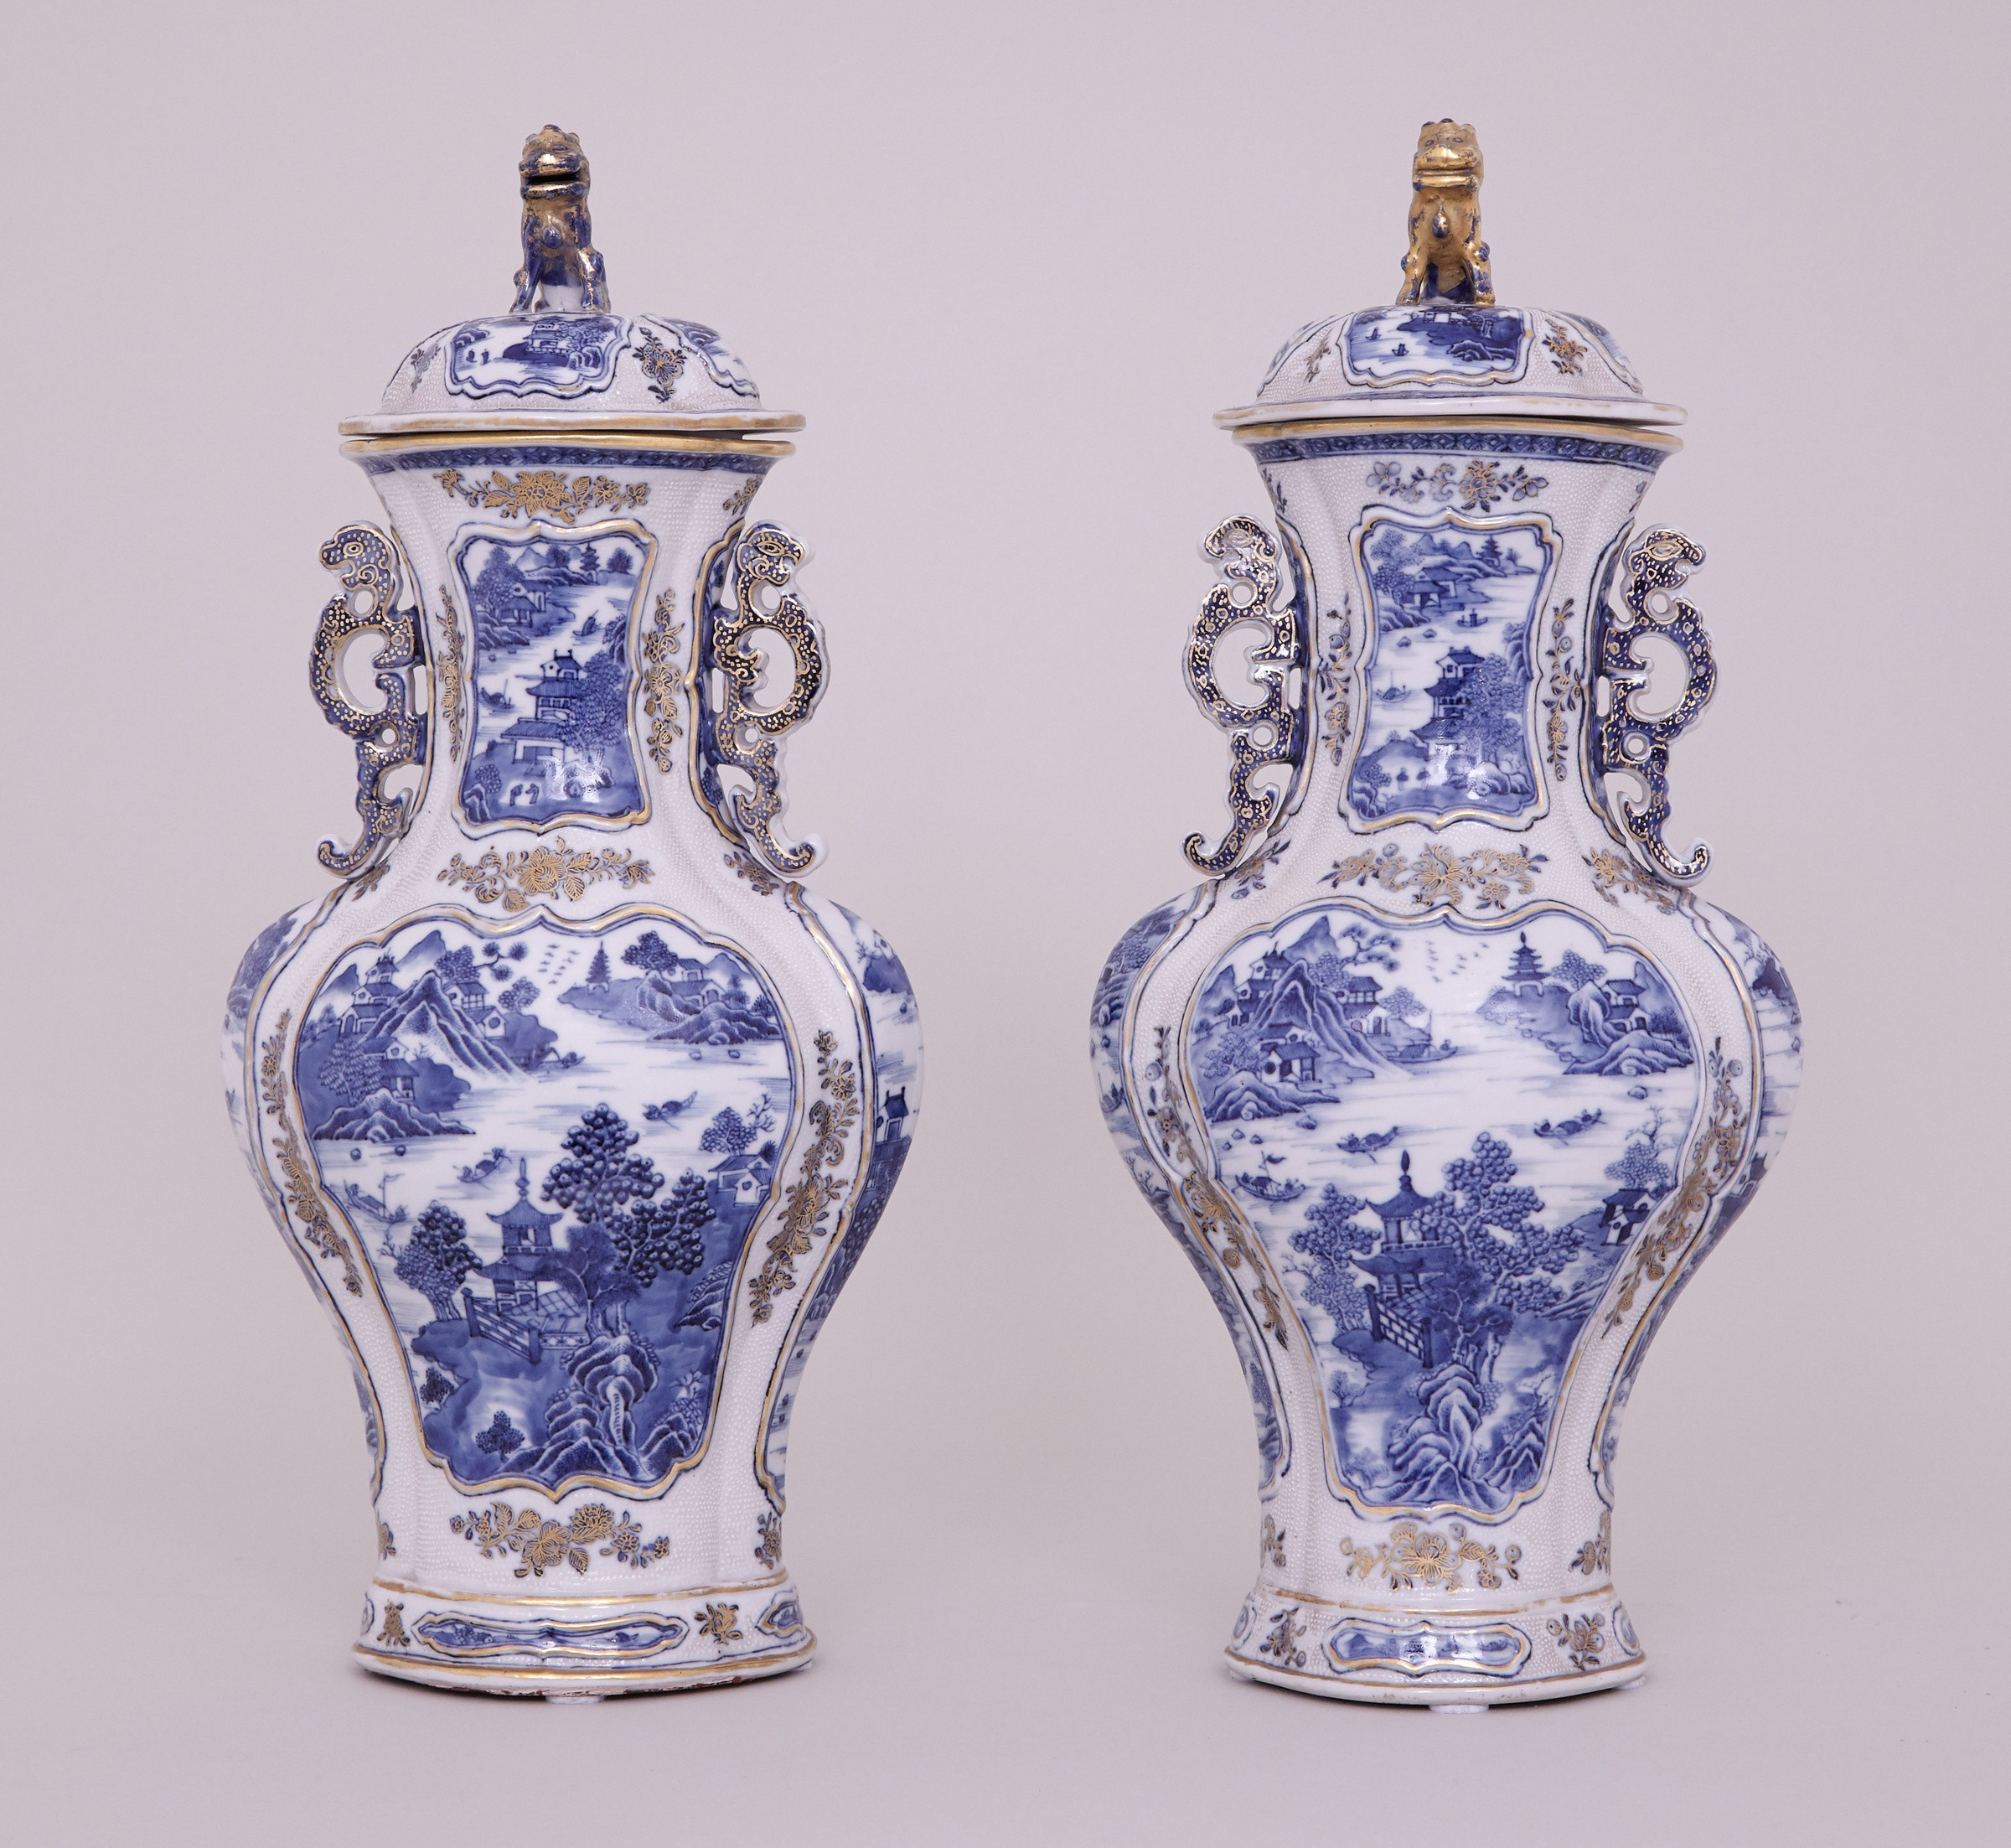 qianlong vase value of a pair of chinese blue and white nankin vases and covers qianlong within a pair of chinese blue and white nankin vases and covers